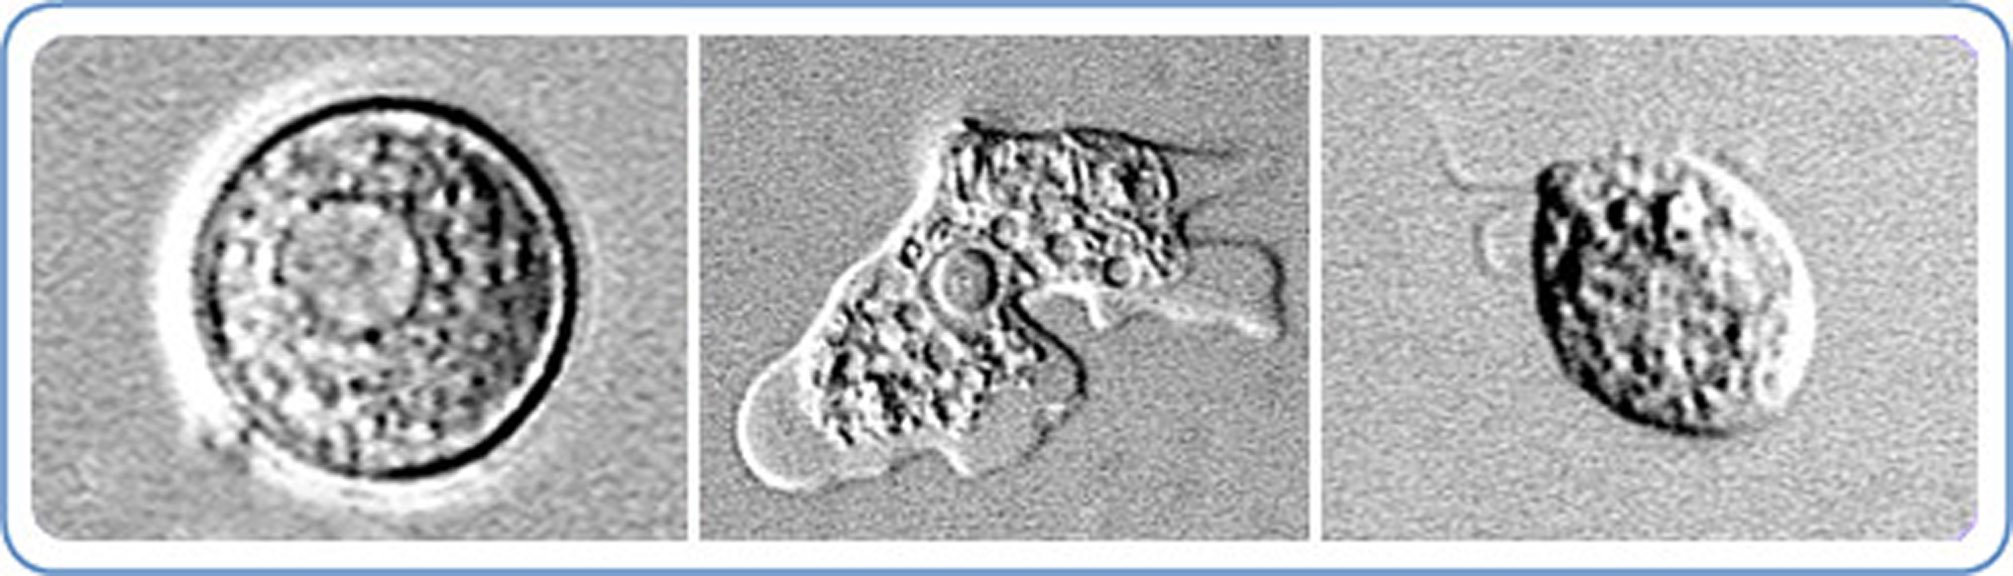 Naegleria fowleri enters the body through the nose and travels to the brain. It's usually found in people who have been swimming in warm freshwater. The amoeba causes a fatal brain infection, according to the CDC.